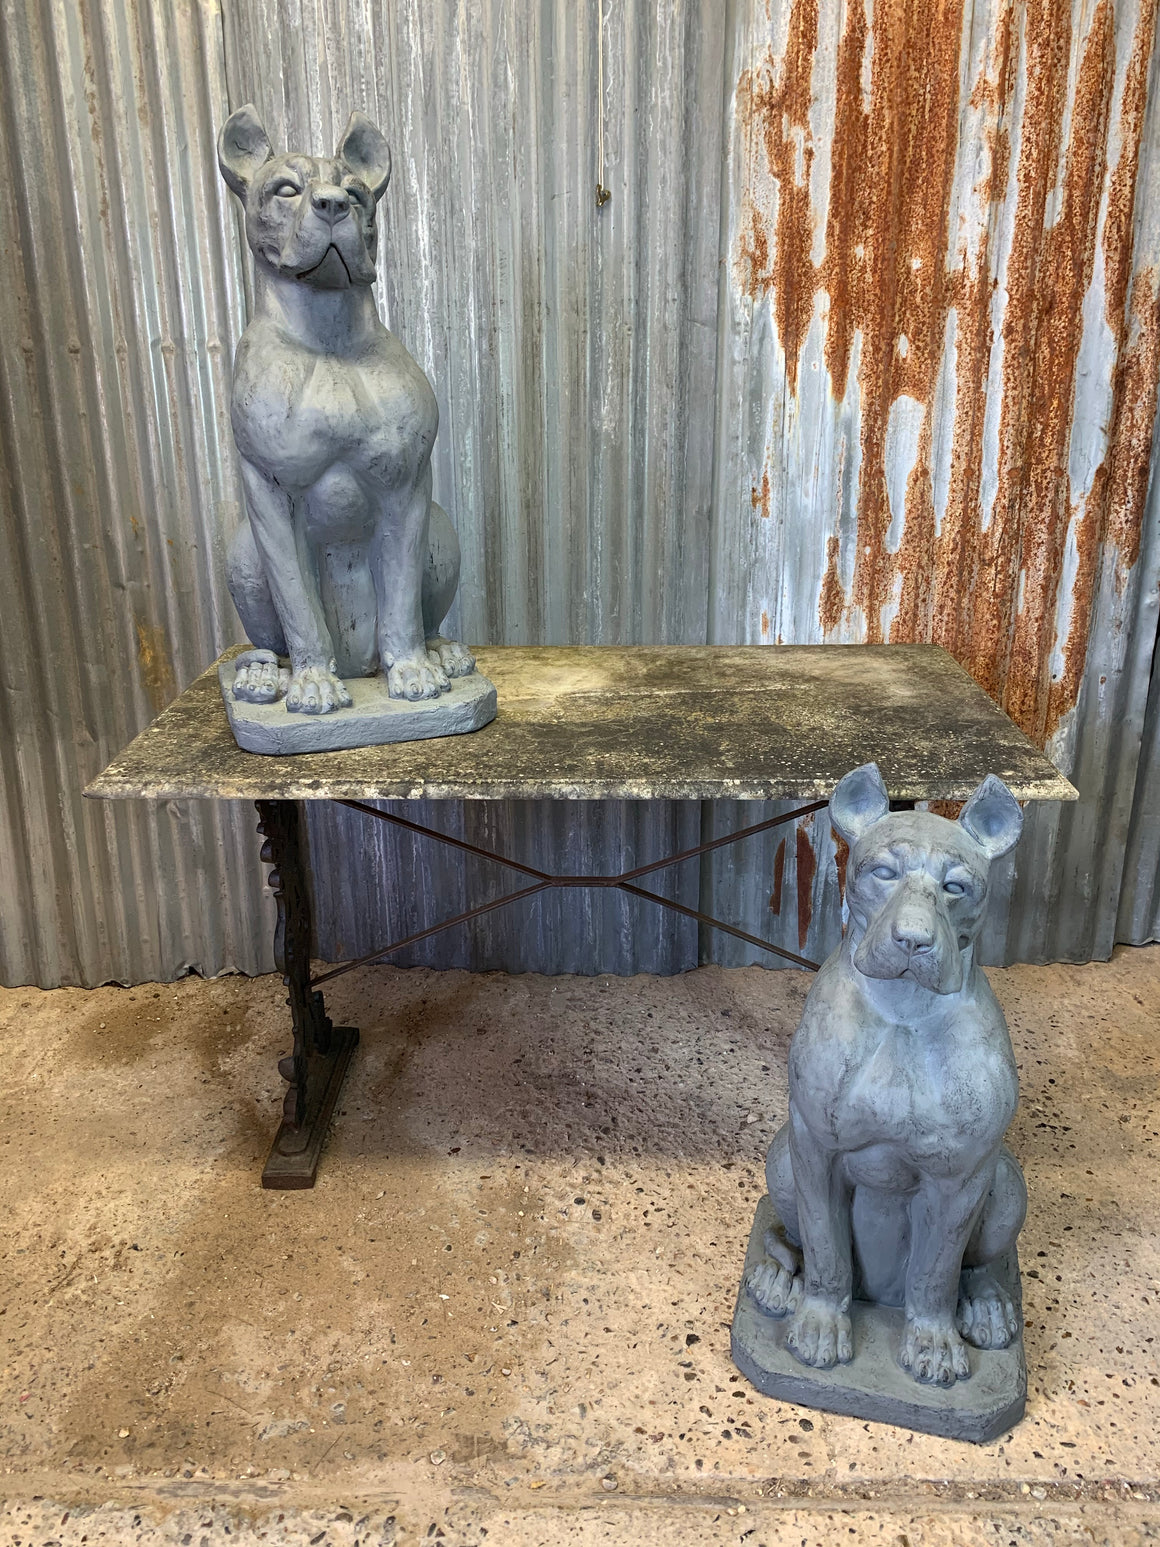 A pair of Great Dane dog statues - 78cm